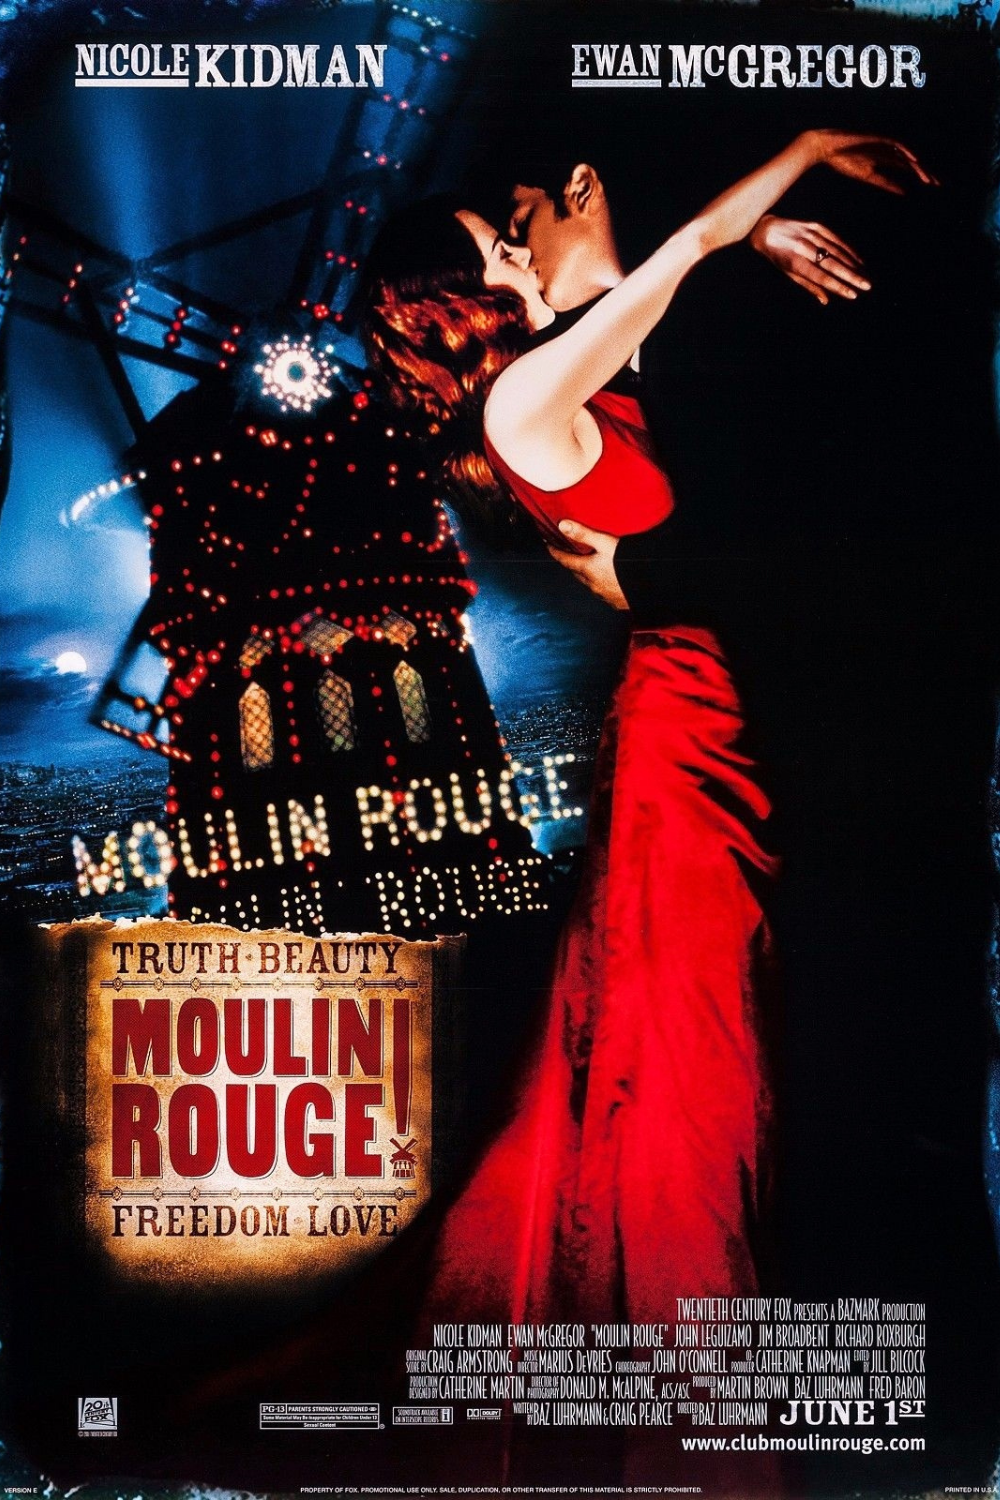 10 Best Movies to Watch Right Now: Moulin Rouge